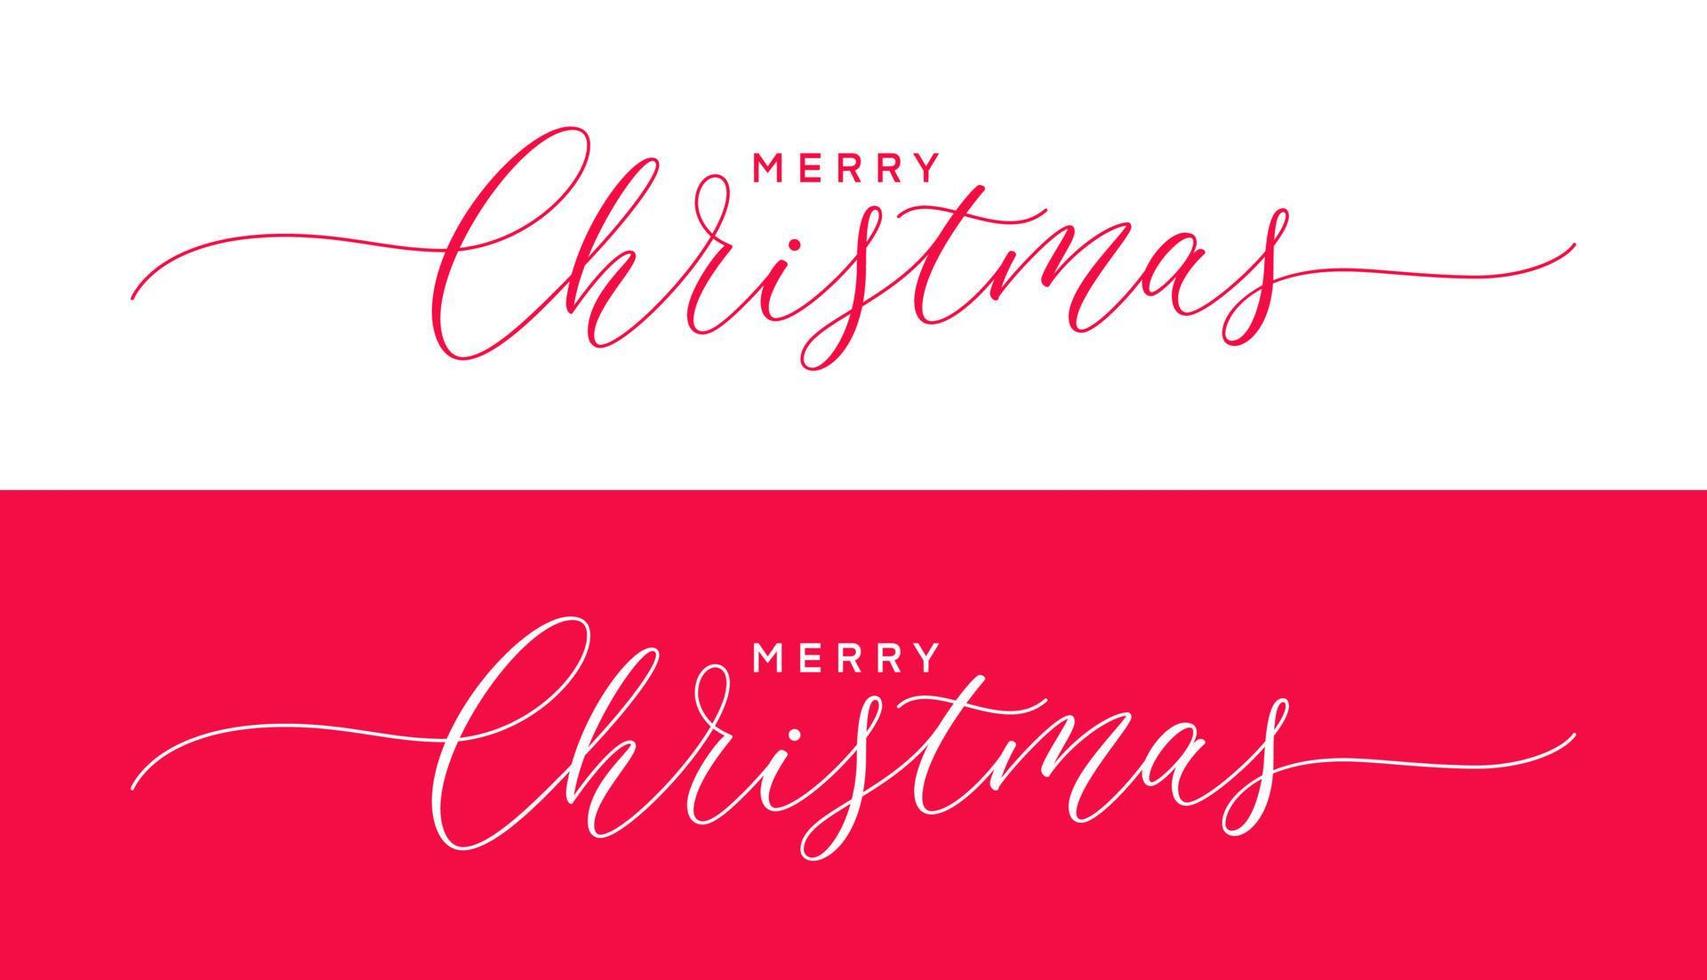 Merry Christmas - holiday calligraphy. Xmas hand drawn lettering. Vector typography design element. Christmas handwritten text.